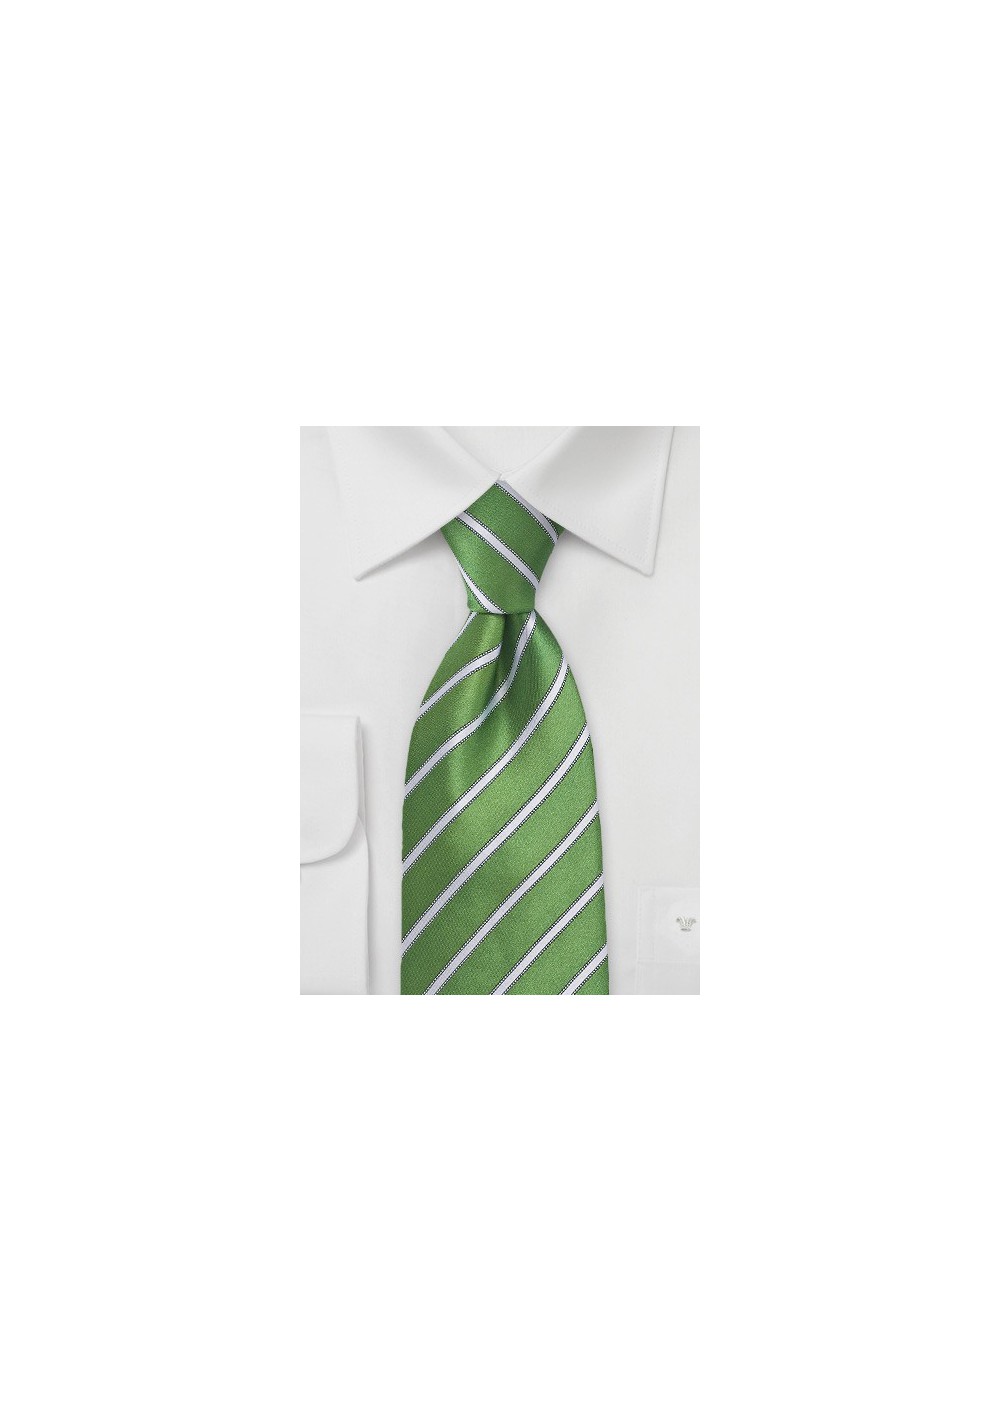 Extra Long Organic Green and White Striped Tie